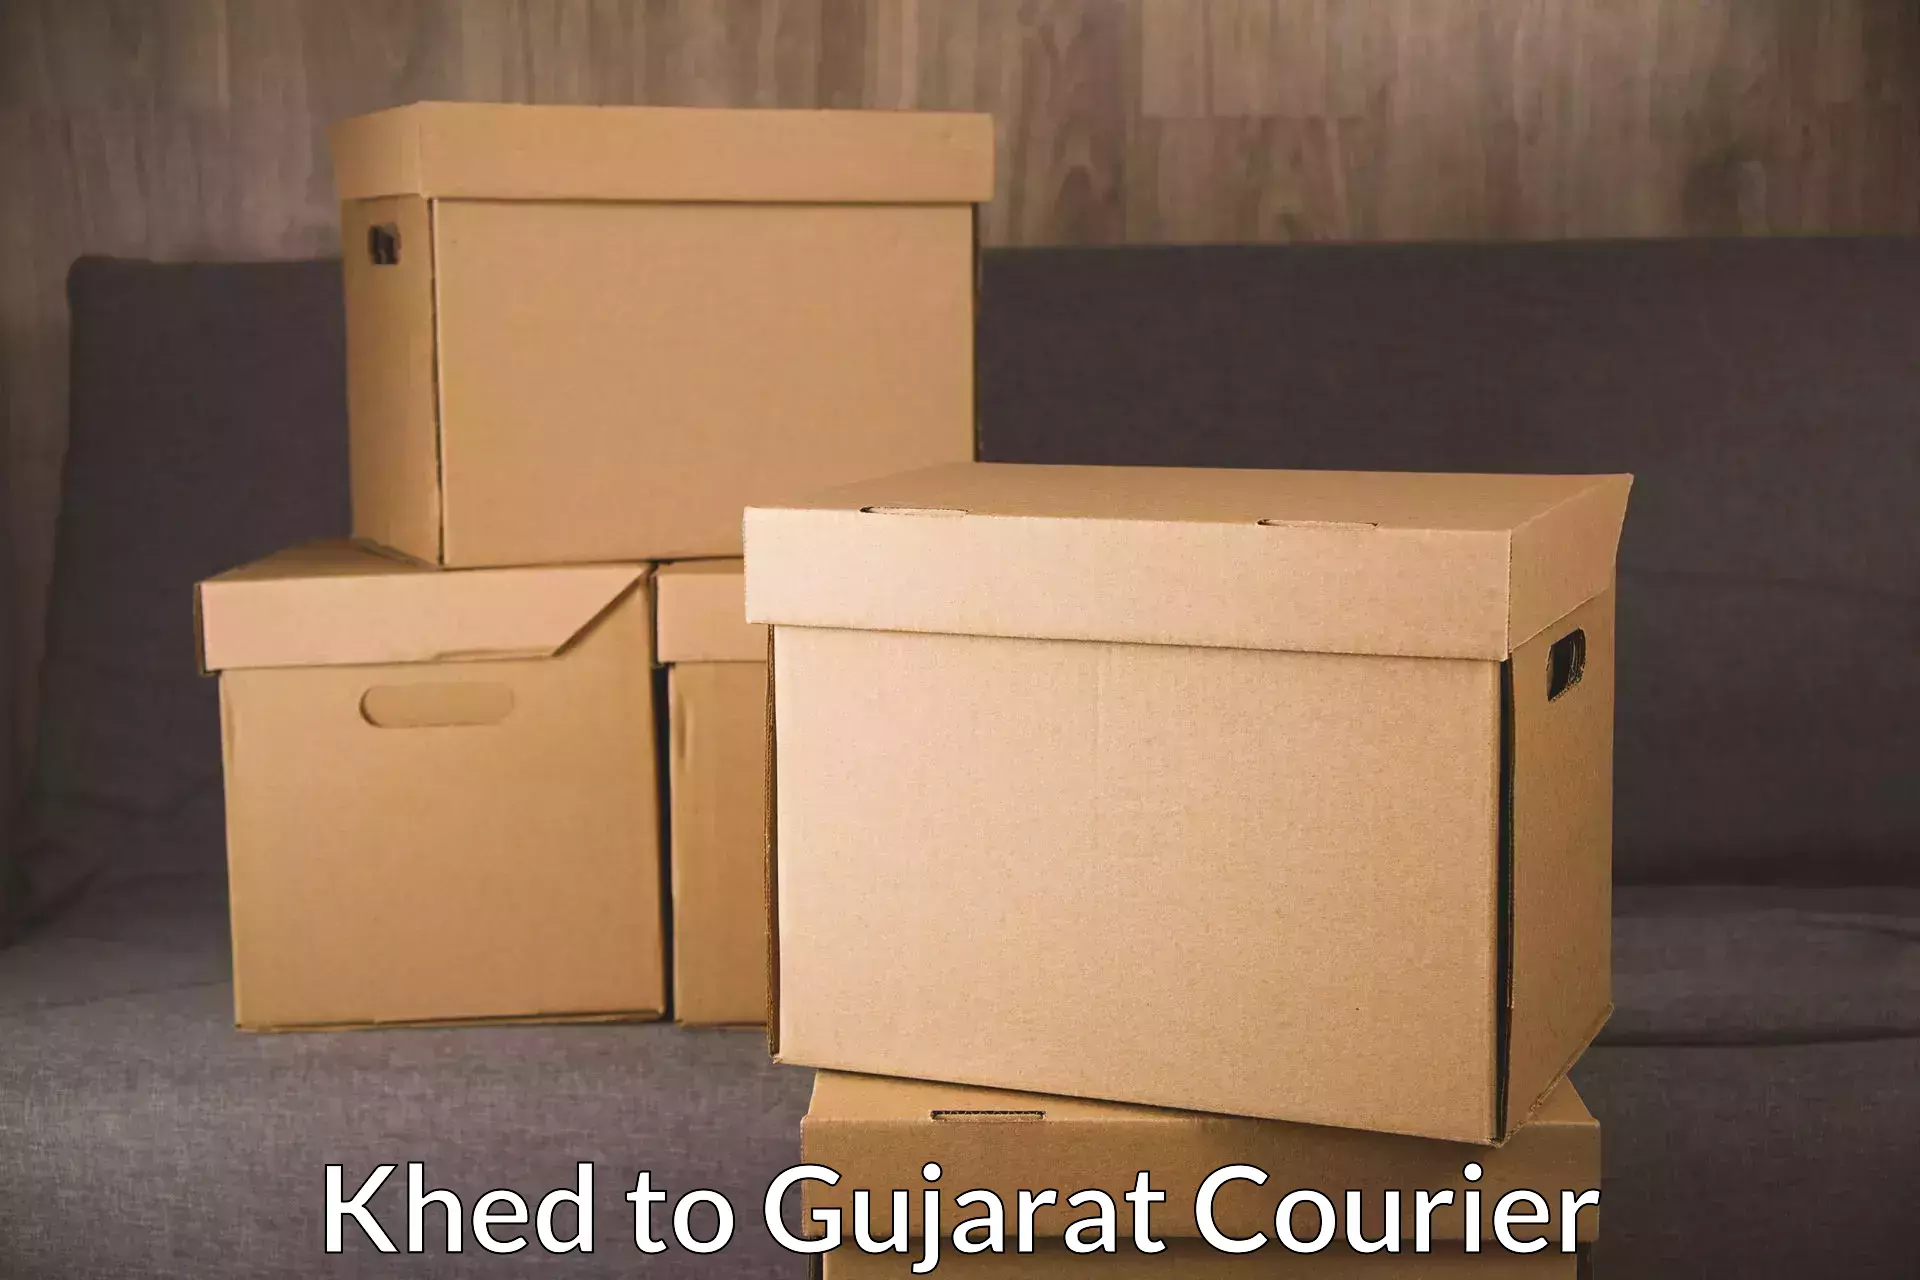 Courier service partnerships Khed to Gujarat